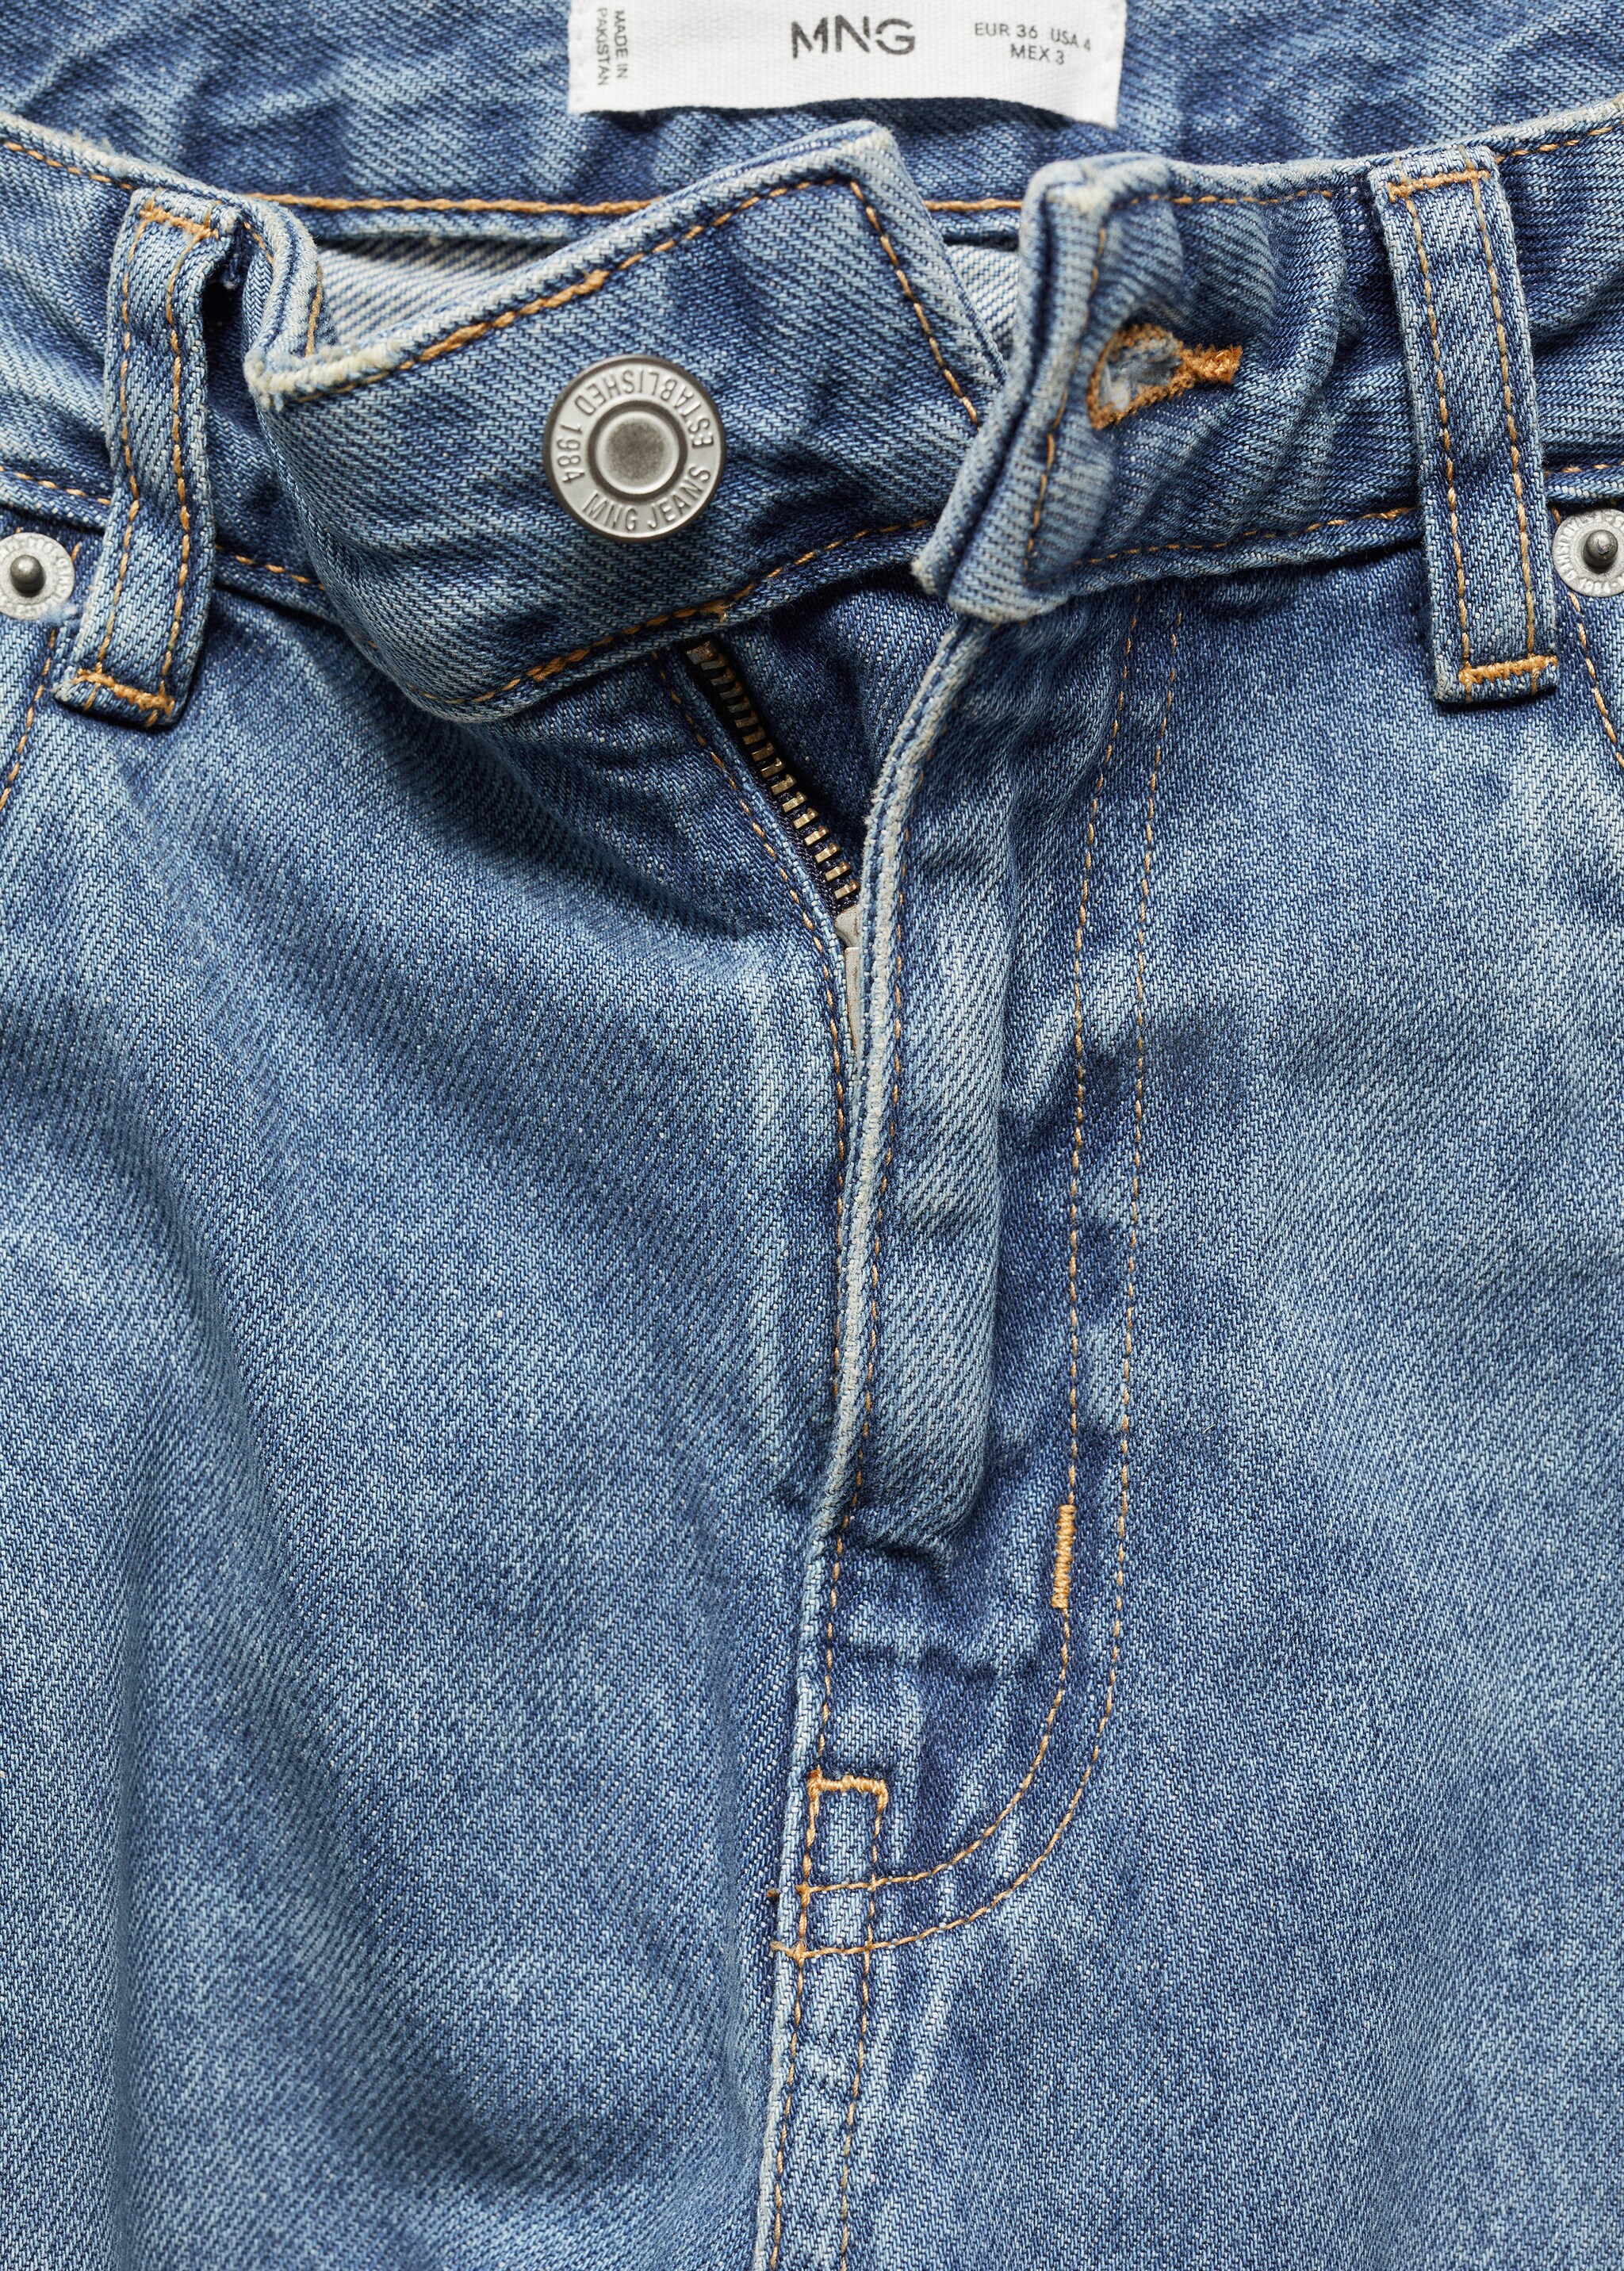 Straight pleated jeans - Details of the article 8